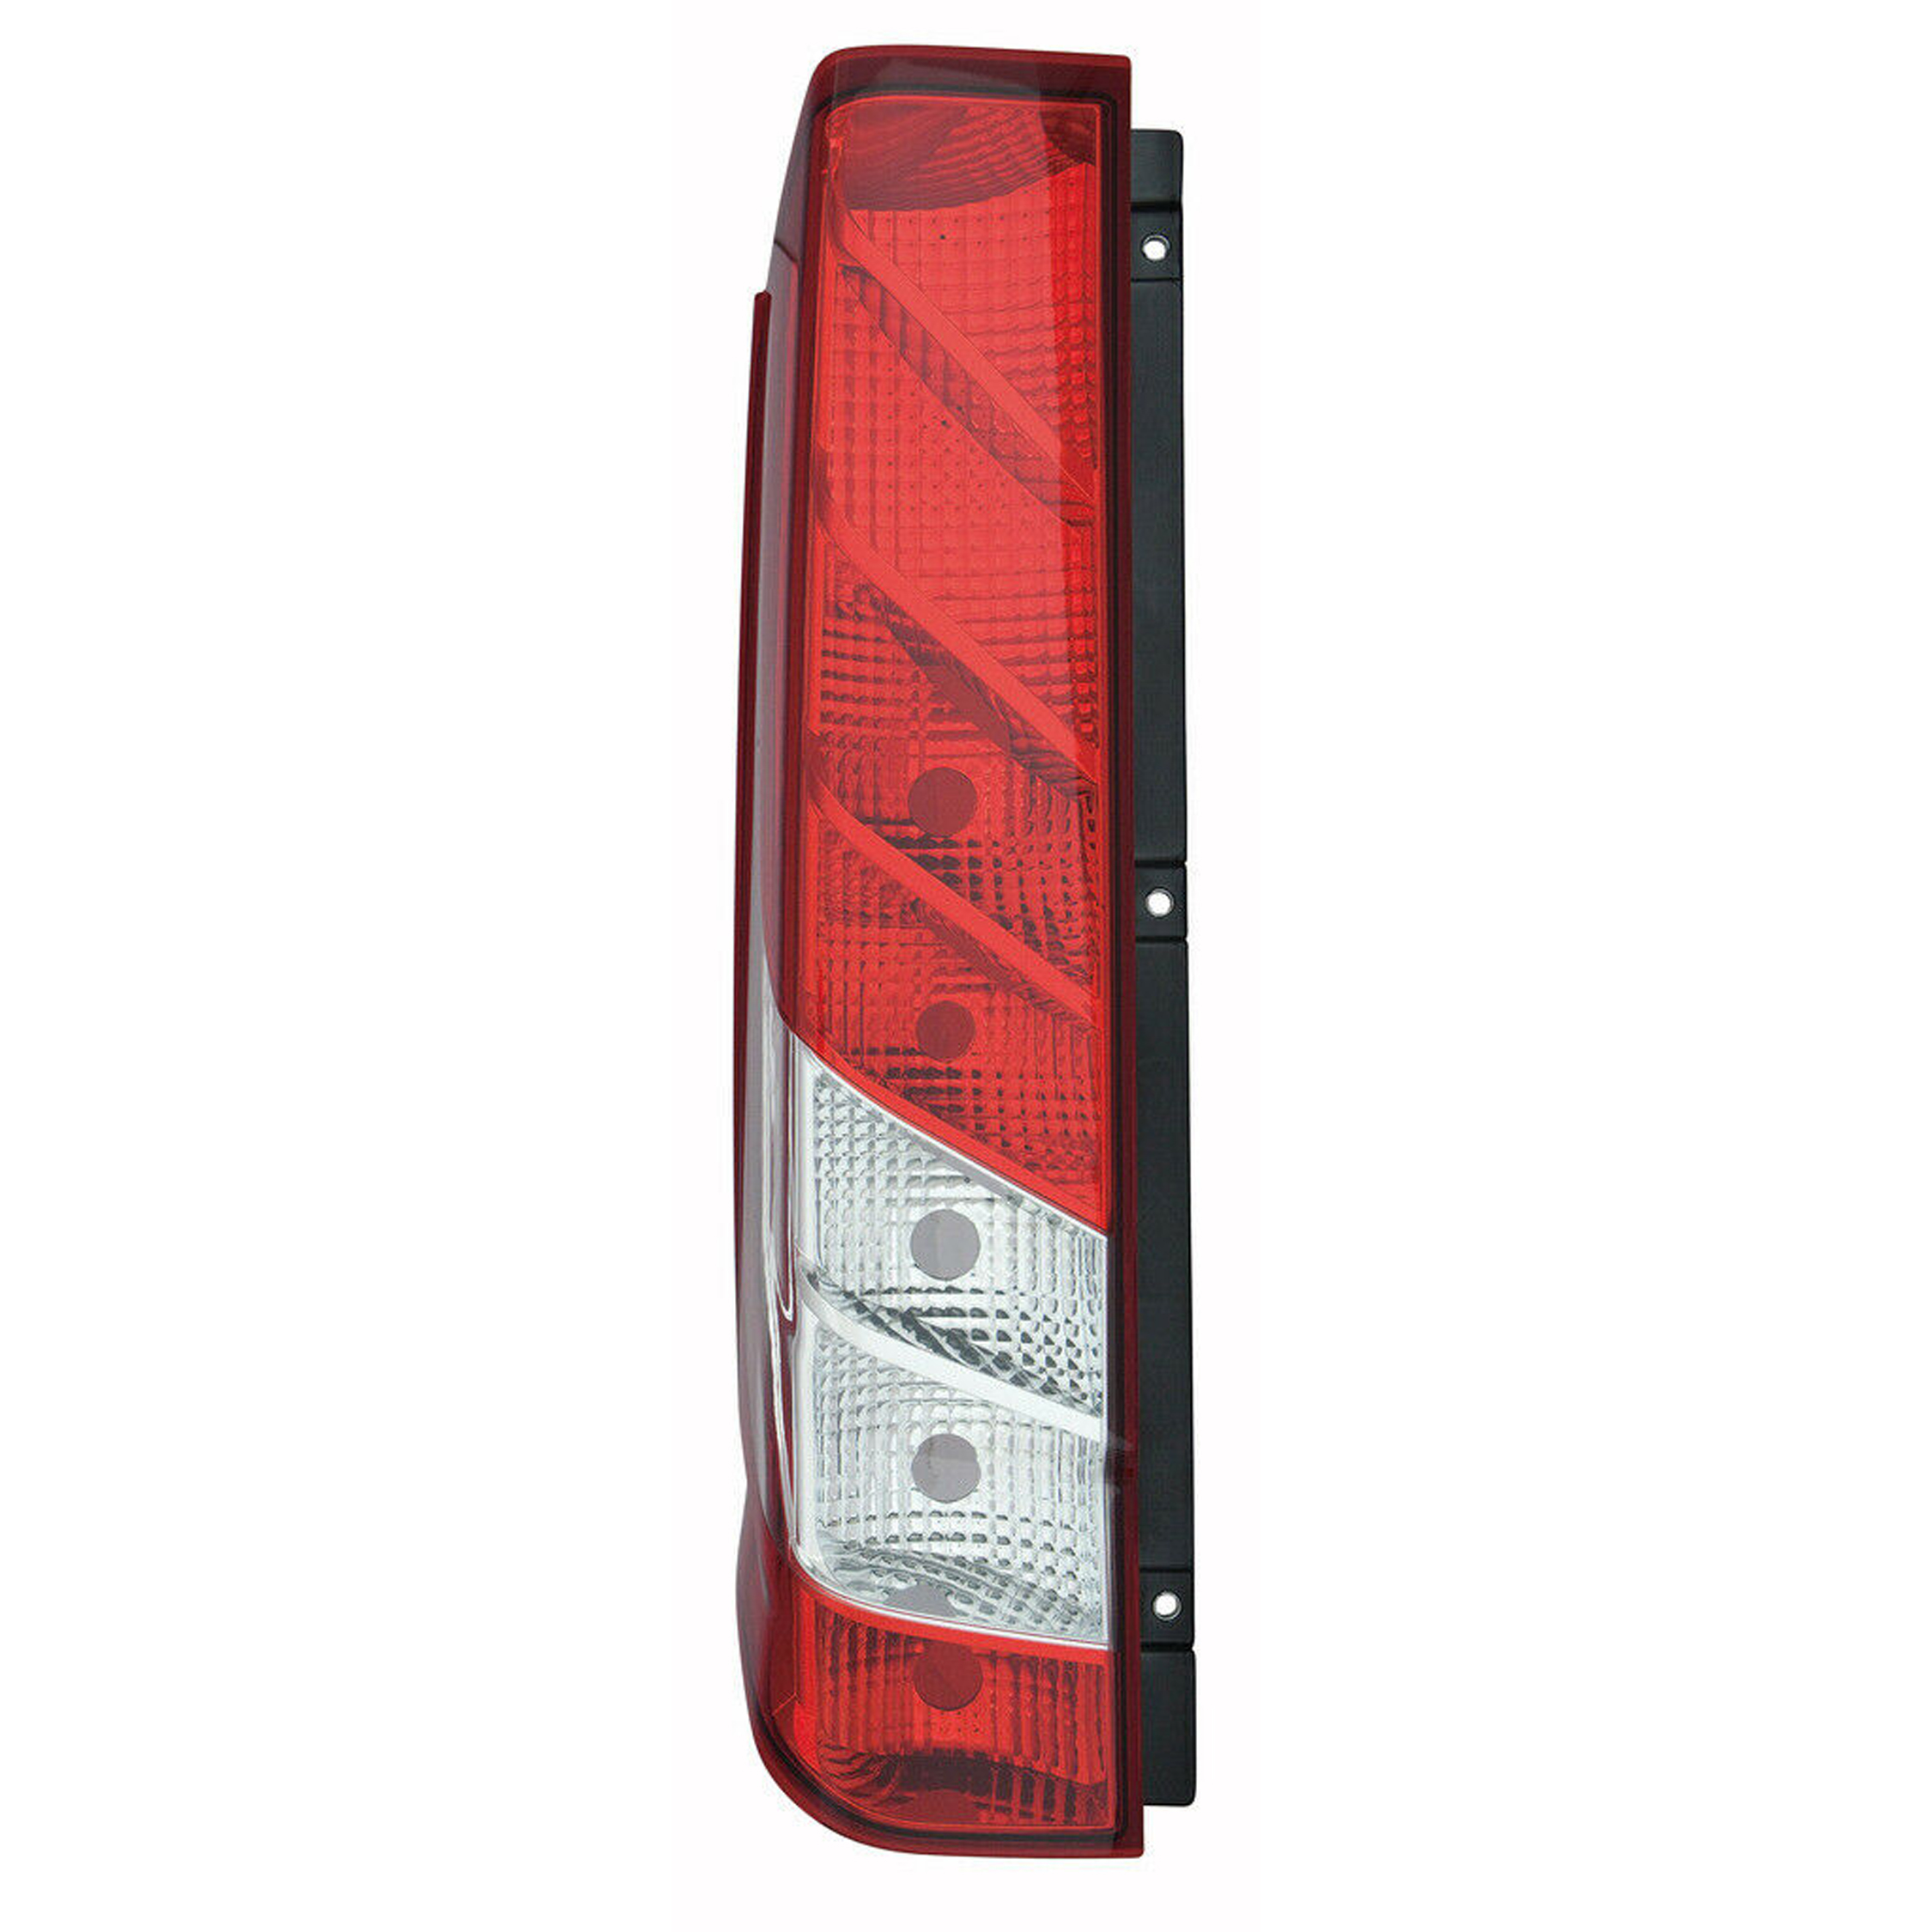 IVECO Daily CHASSIS CAB VAN REAR LAMP LIGHT LEFT HAND ( UK Passenger Side ) 2006 APR to 2014 – REAR LAMP LIGHT